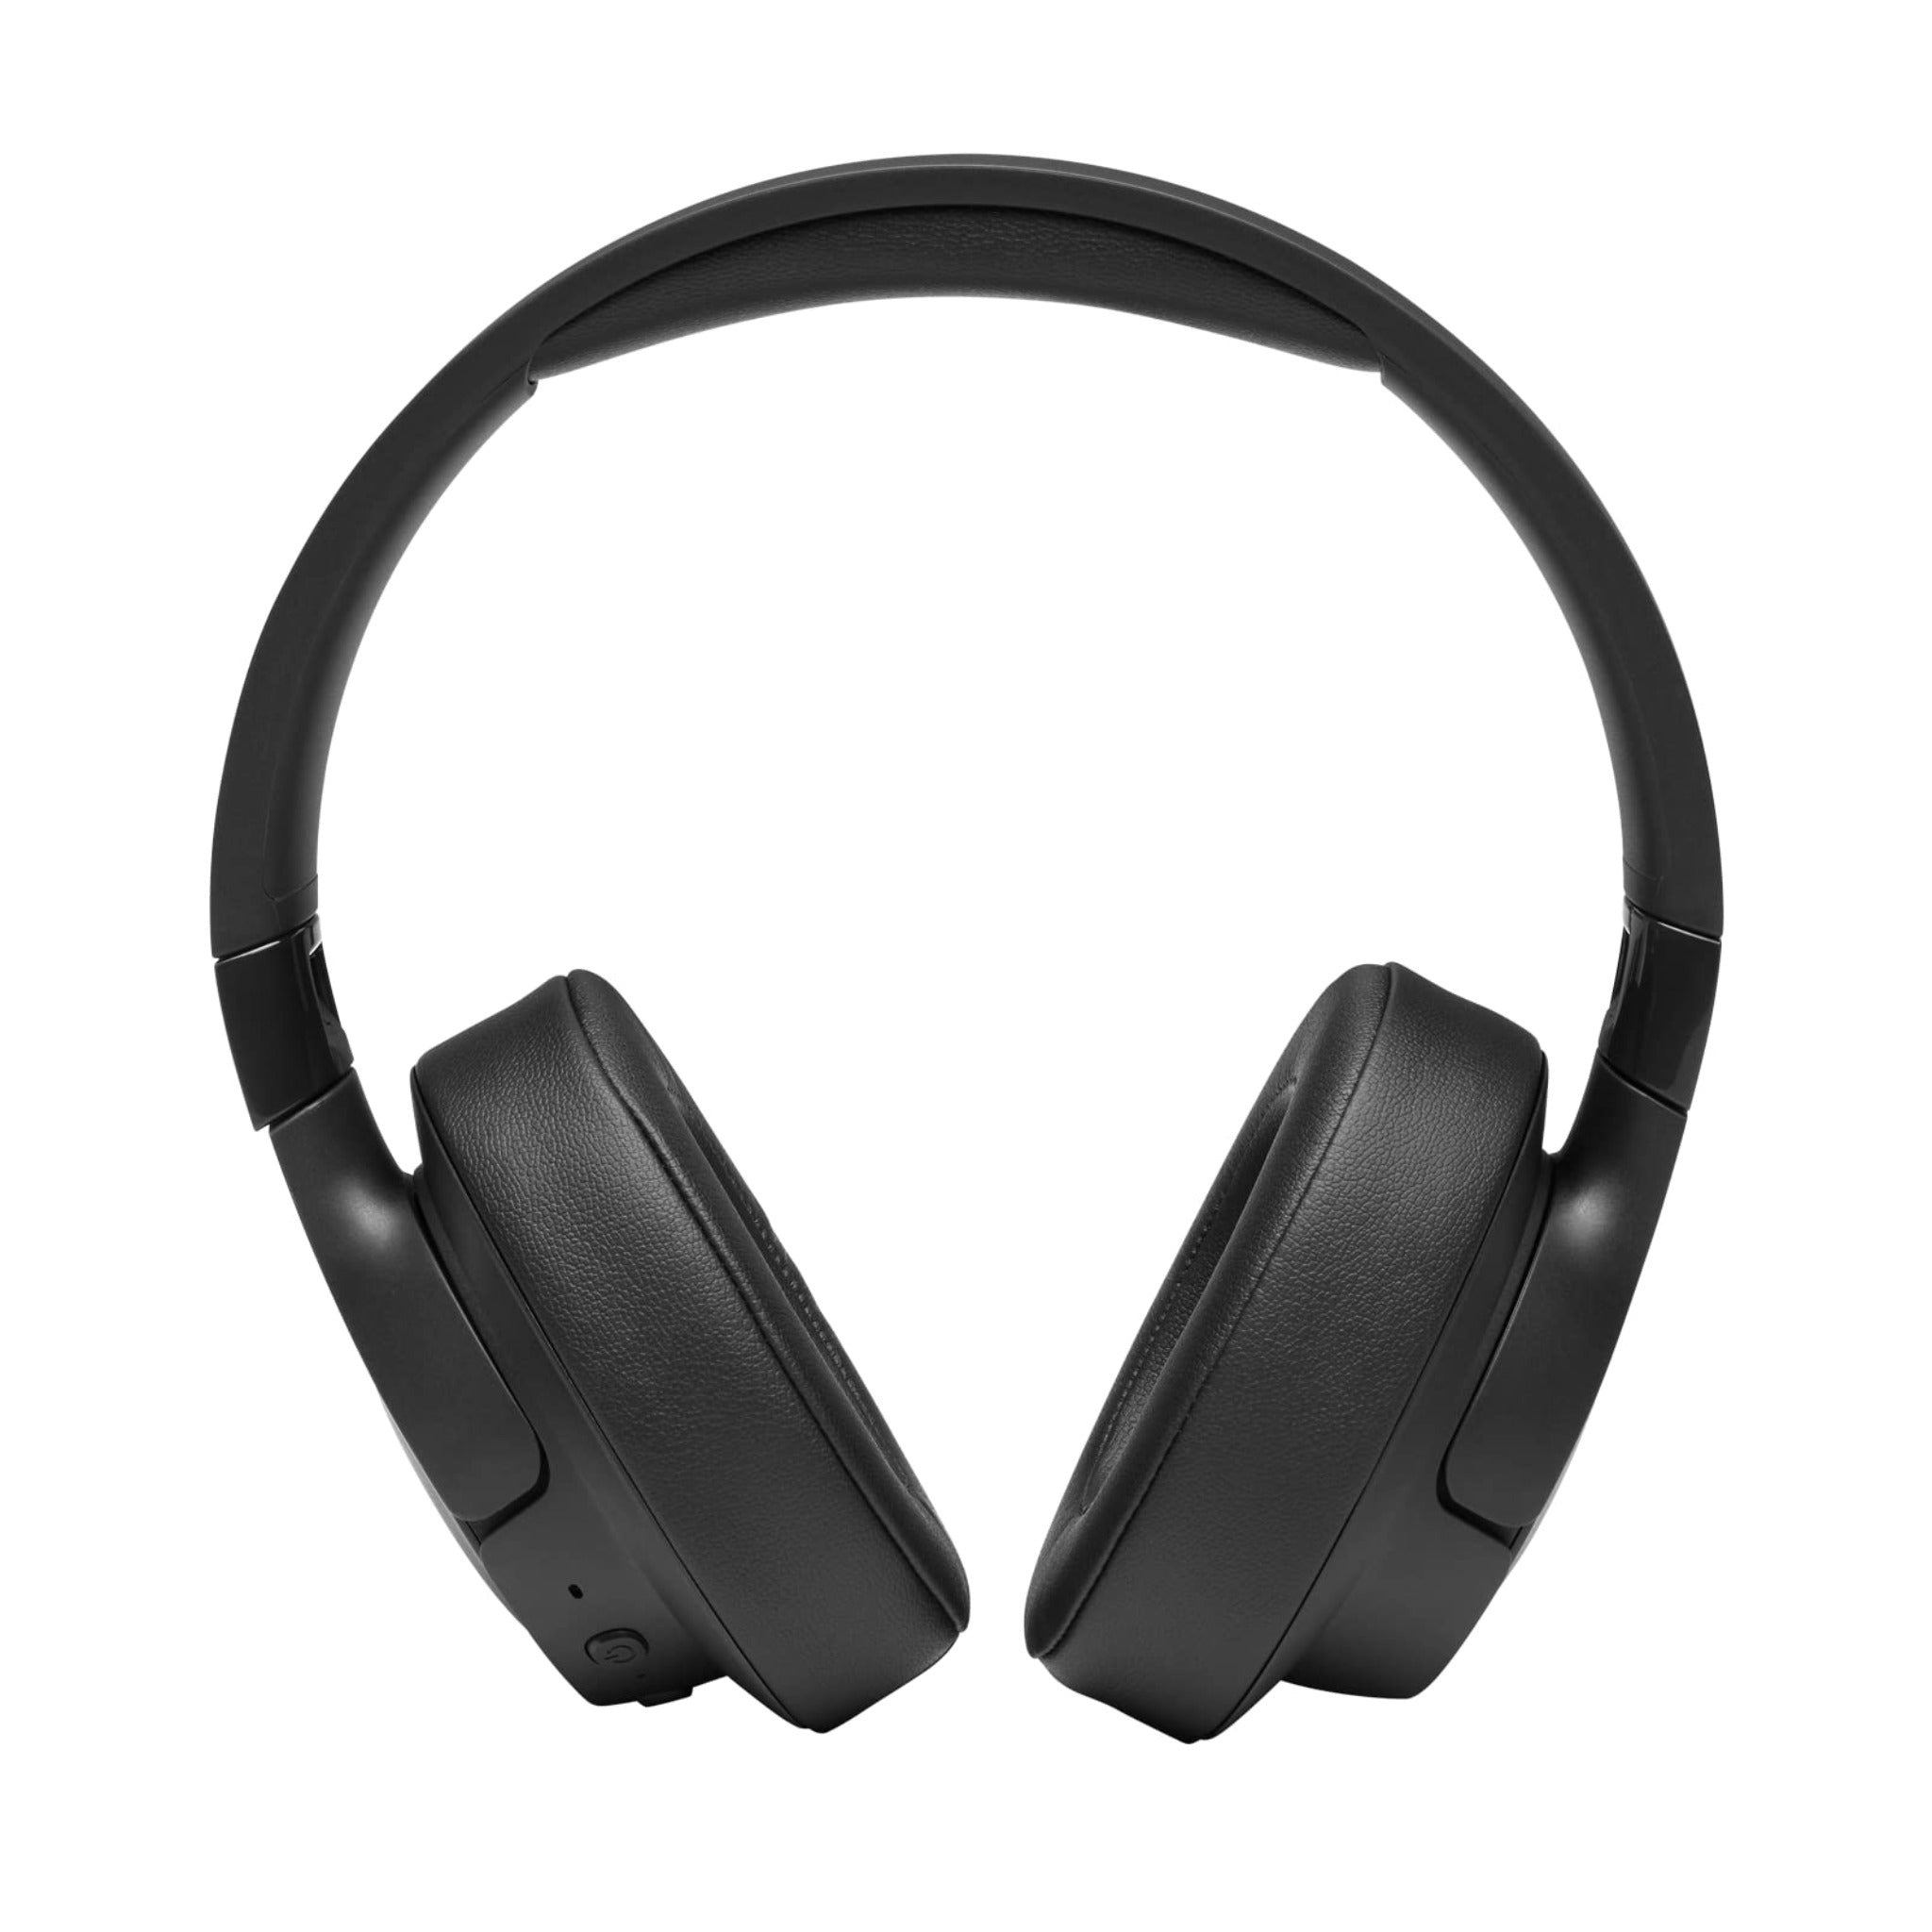 JBL 760NC / [ Bluetooth headphone with active noise cancellation